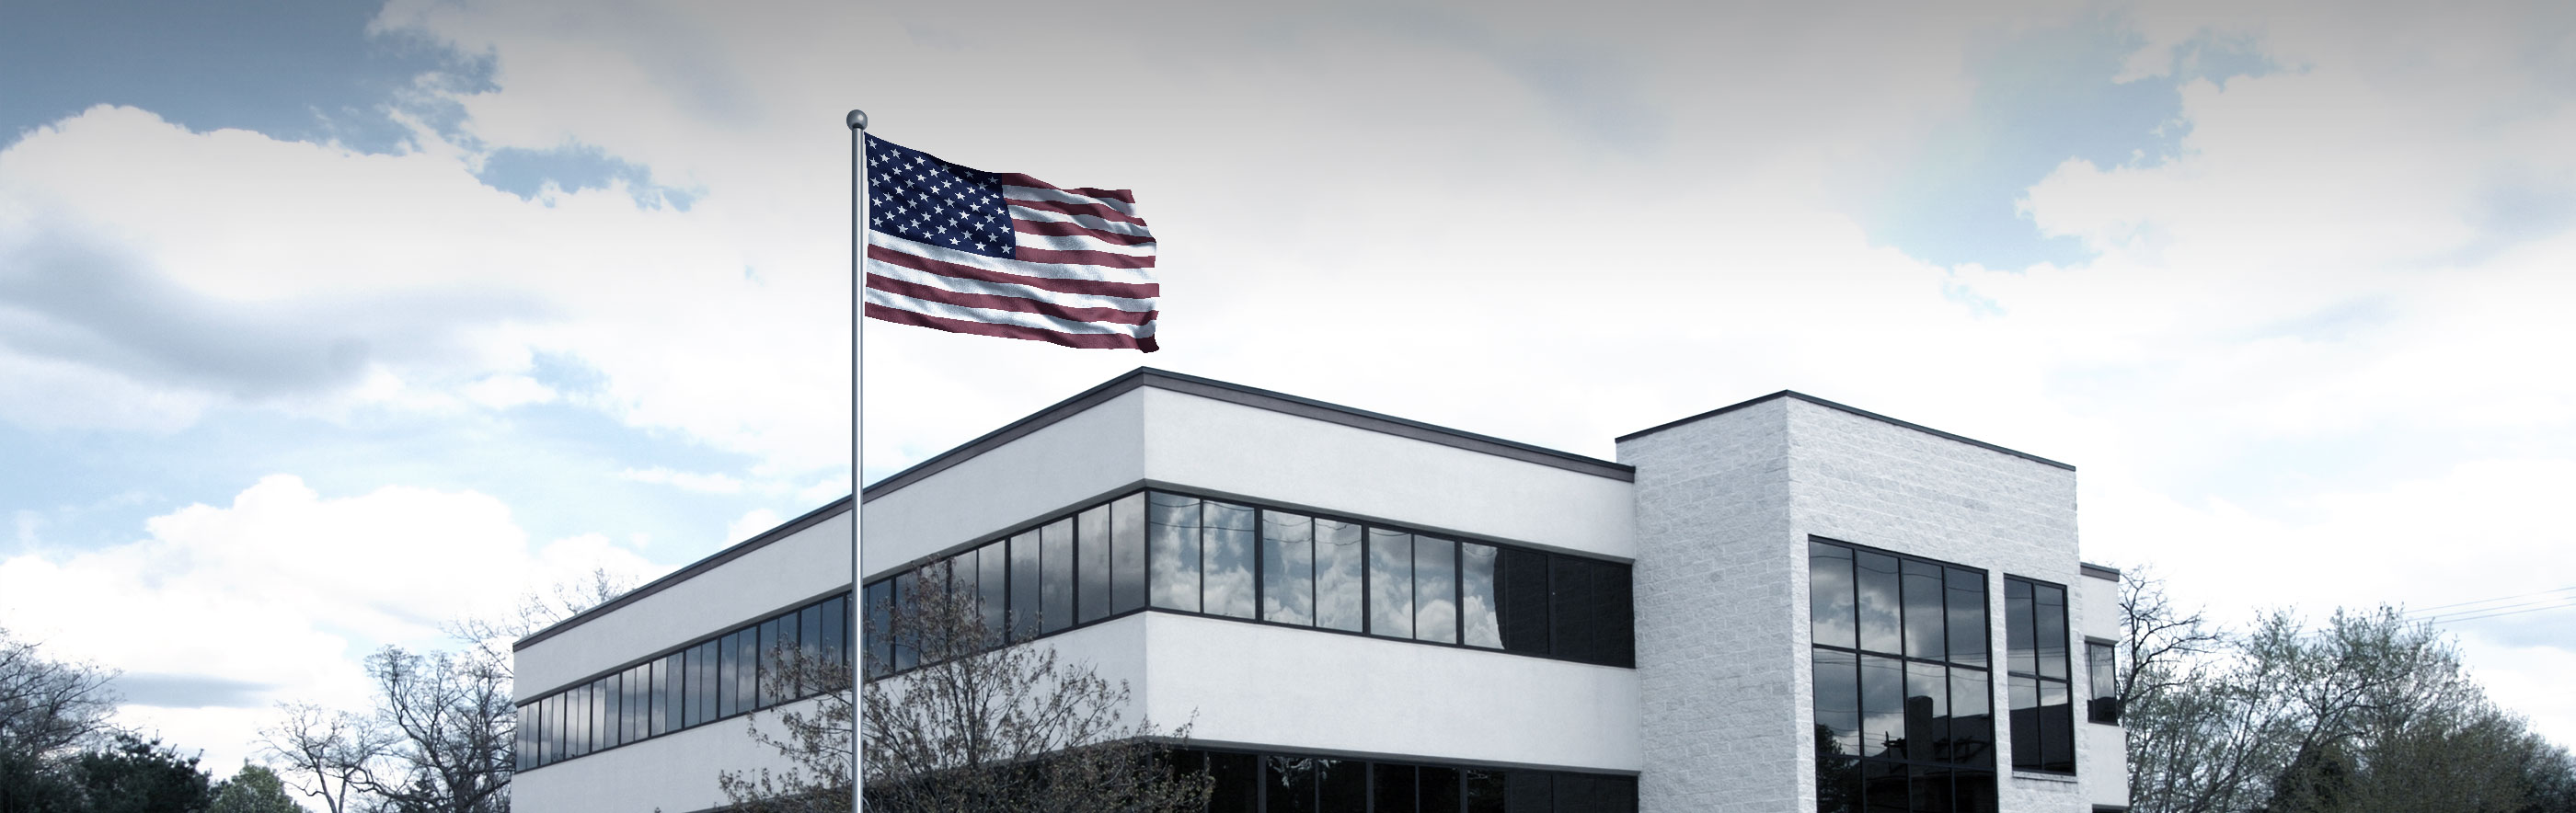 USA flagpole in front of ProCon Roofing building in USA